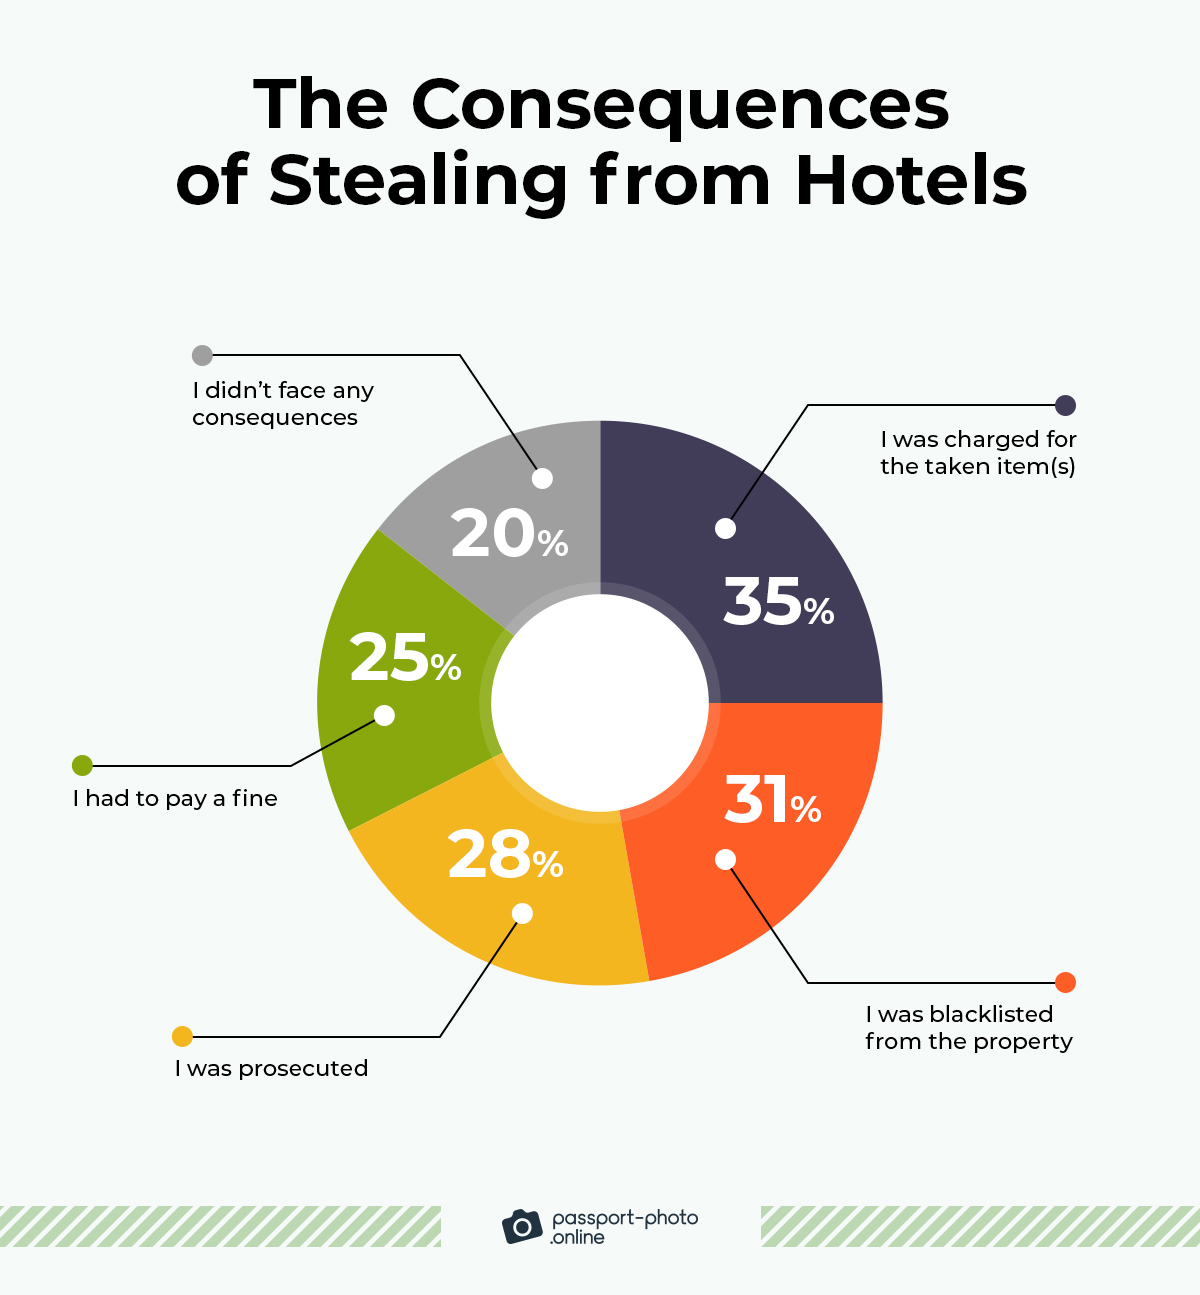 the most common consequence of stealing from hotels is being charged for the missing items